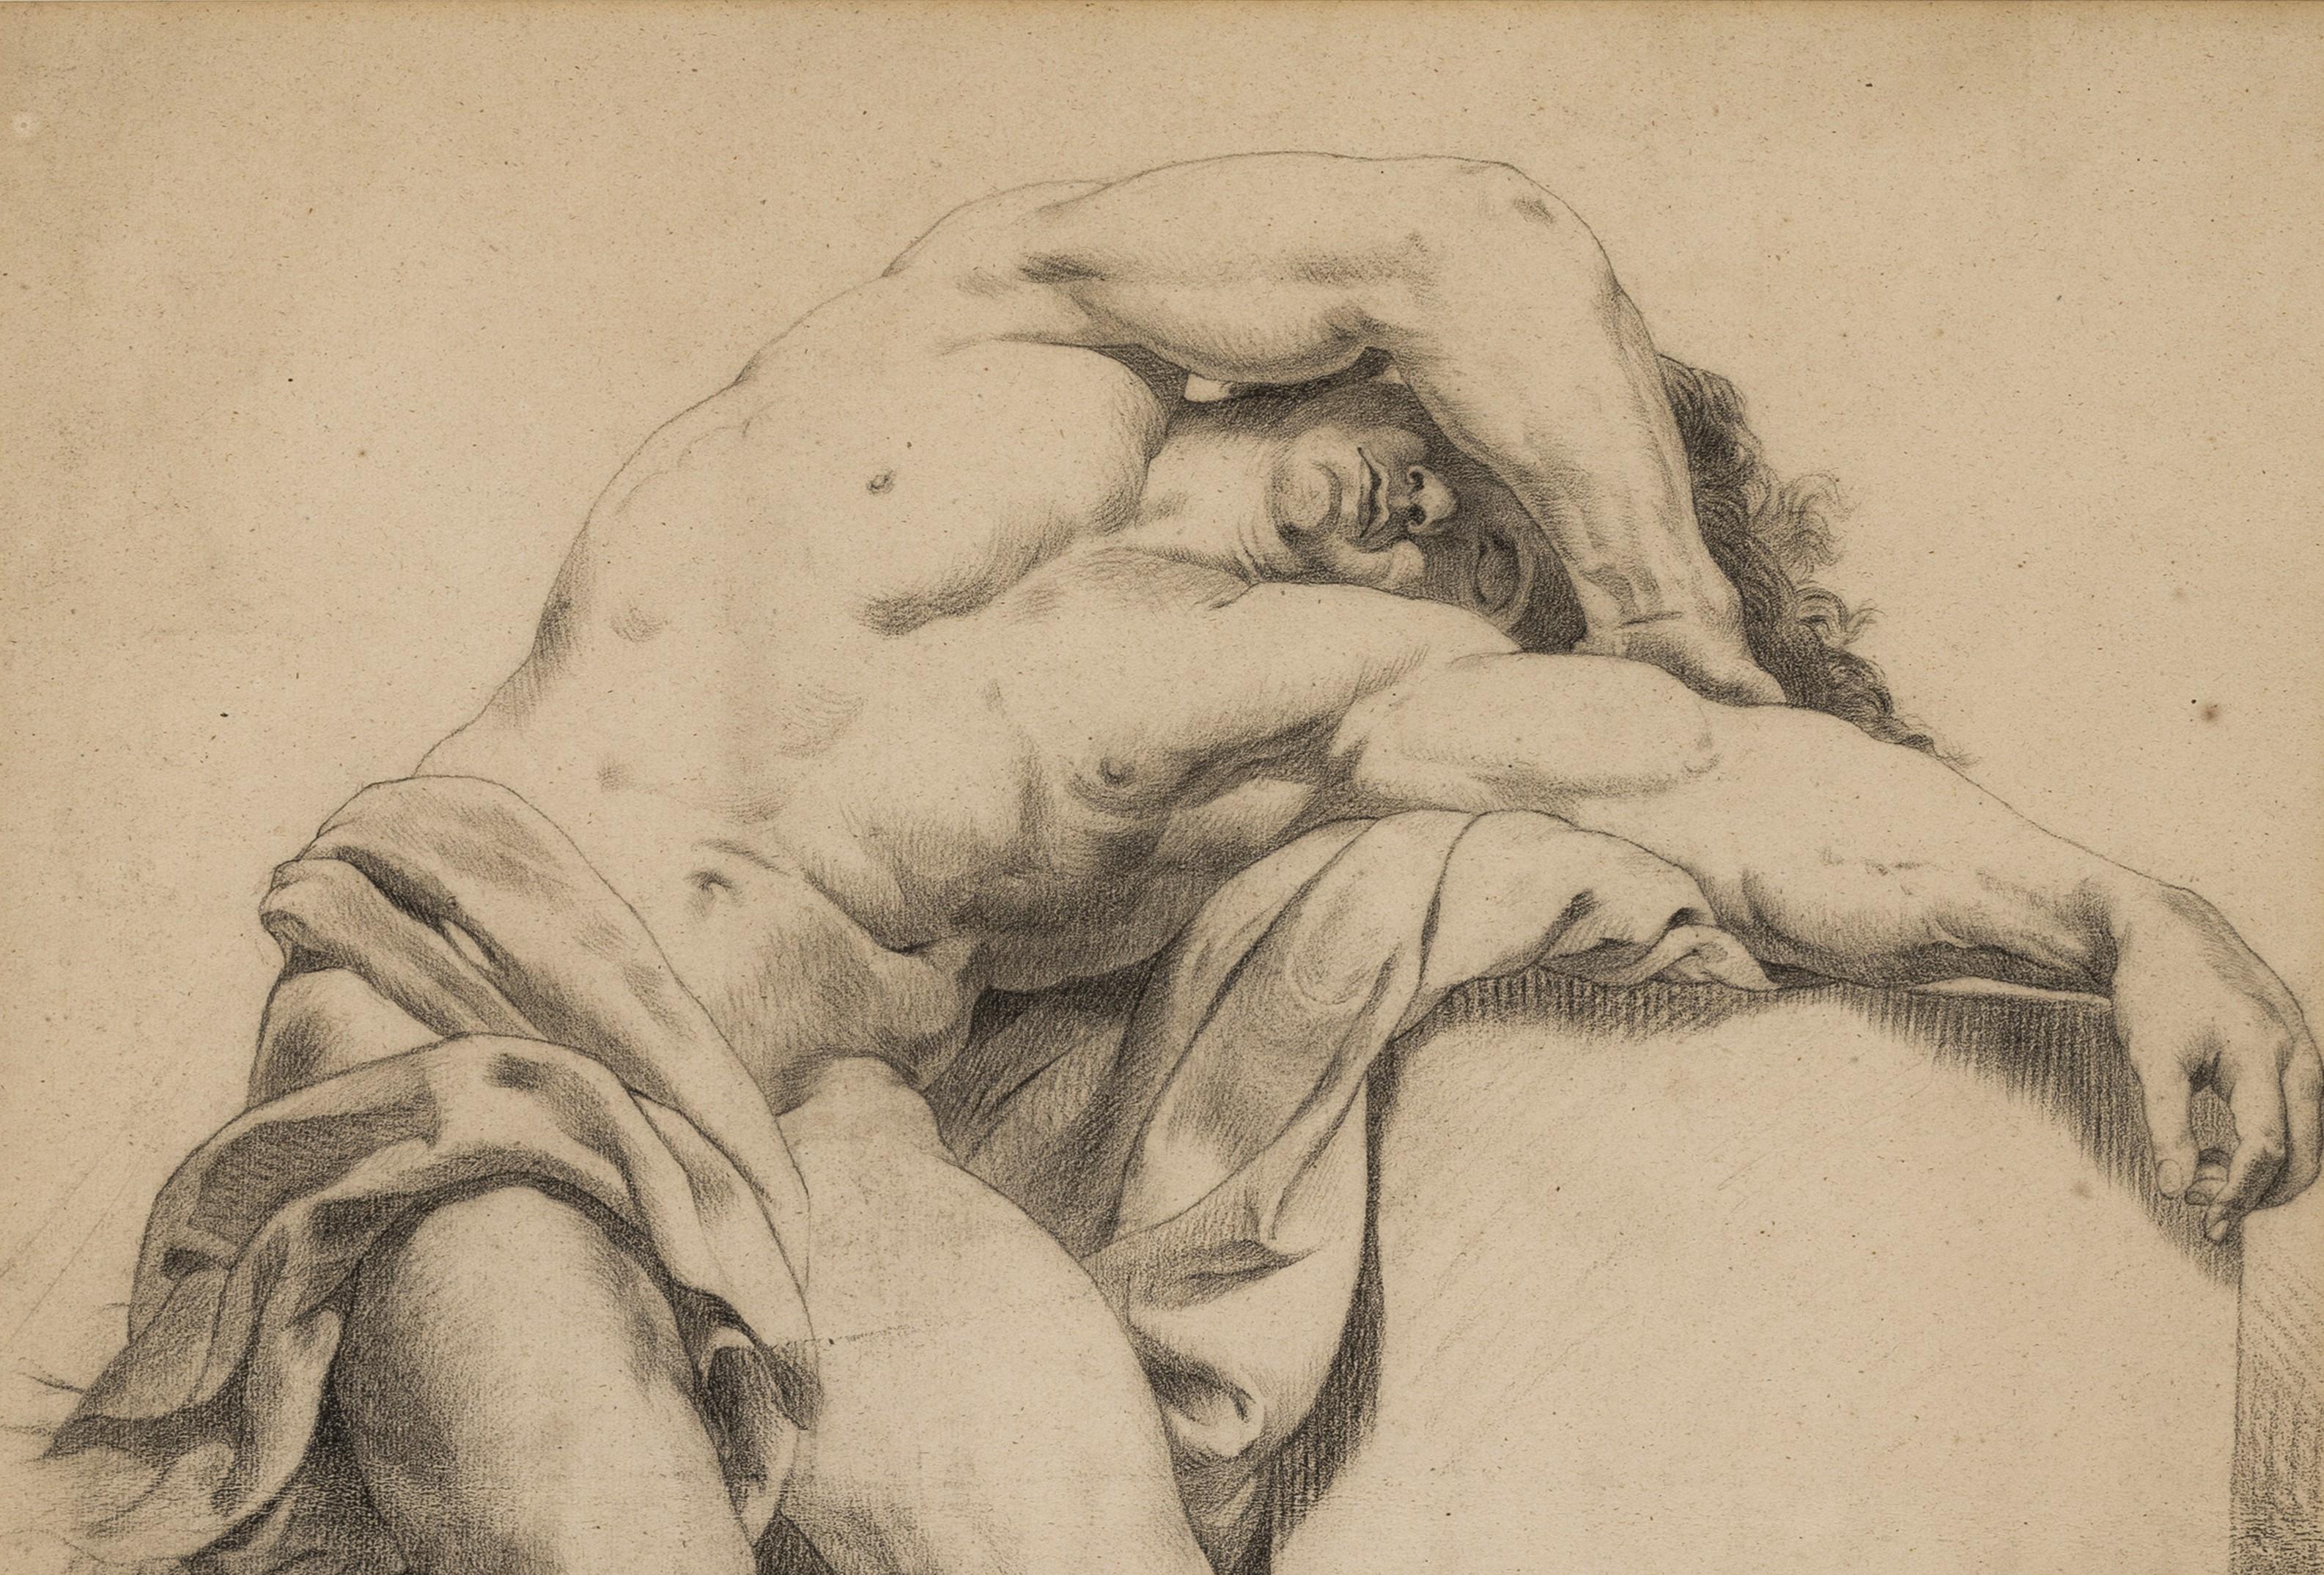 Pencil on paper, dated (lower right), 55cm x 44cm (76cm x 64cm framed)

Drawings and paintings of the nude were central to academic art training in Europe from the 16th century onwards. The practice of repeatedly drawing the nude, and particularly